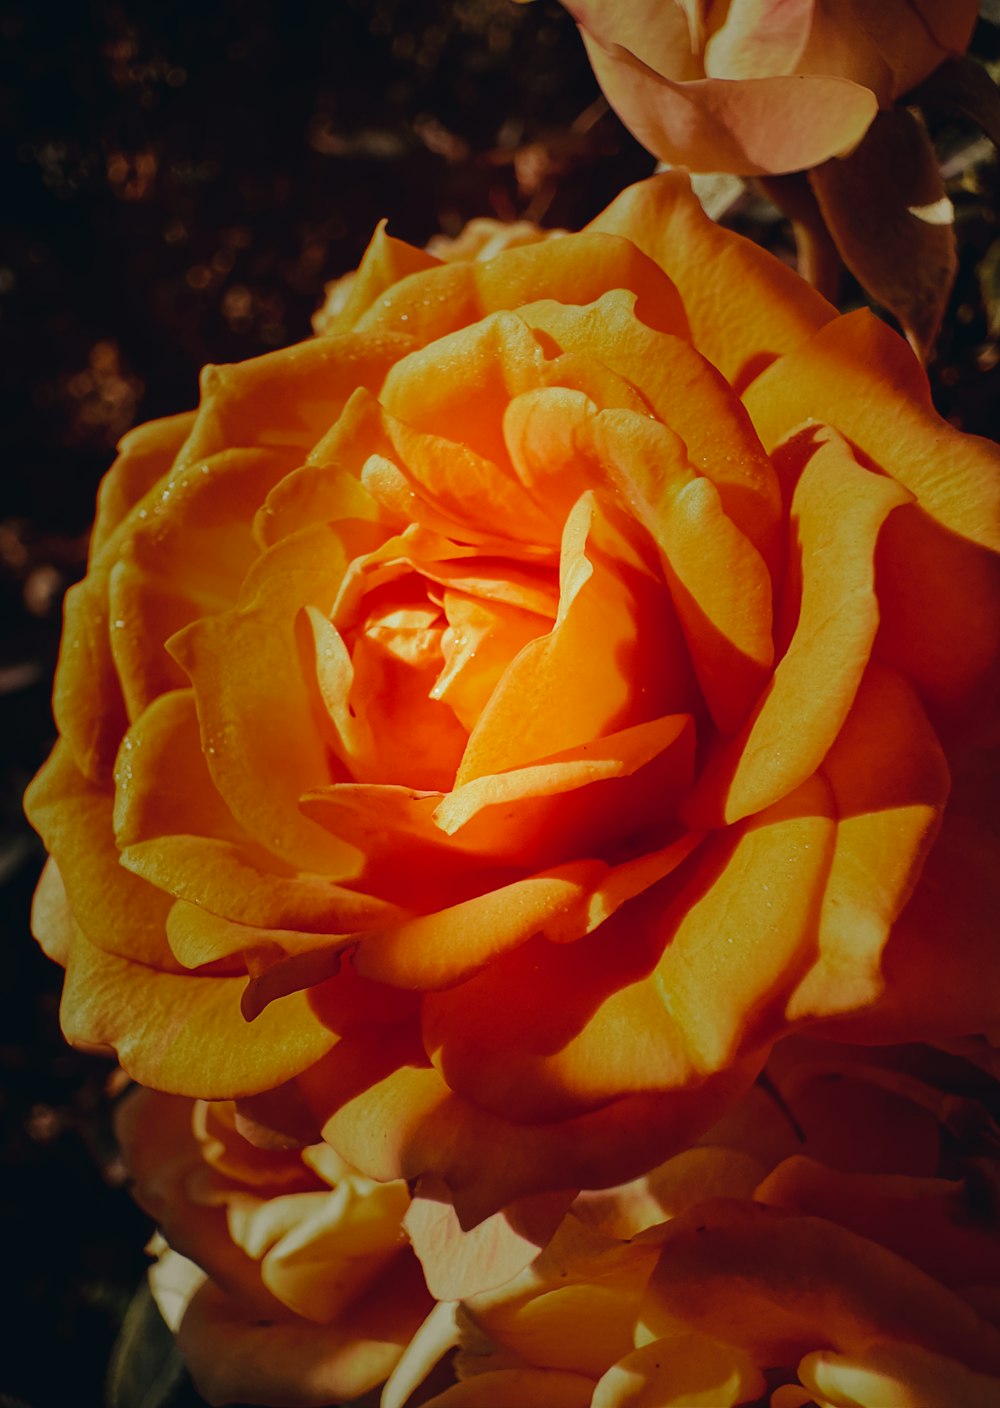 a close up of a yellow rose with water droplets on it